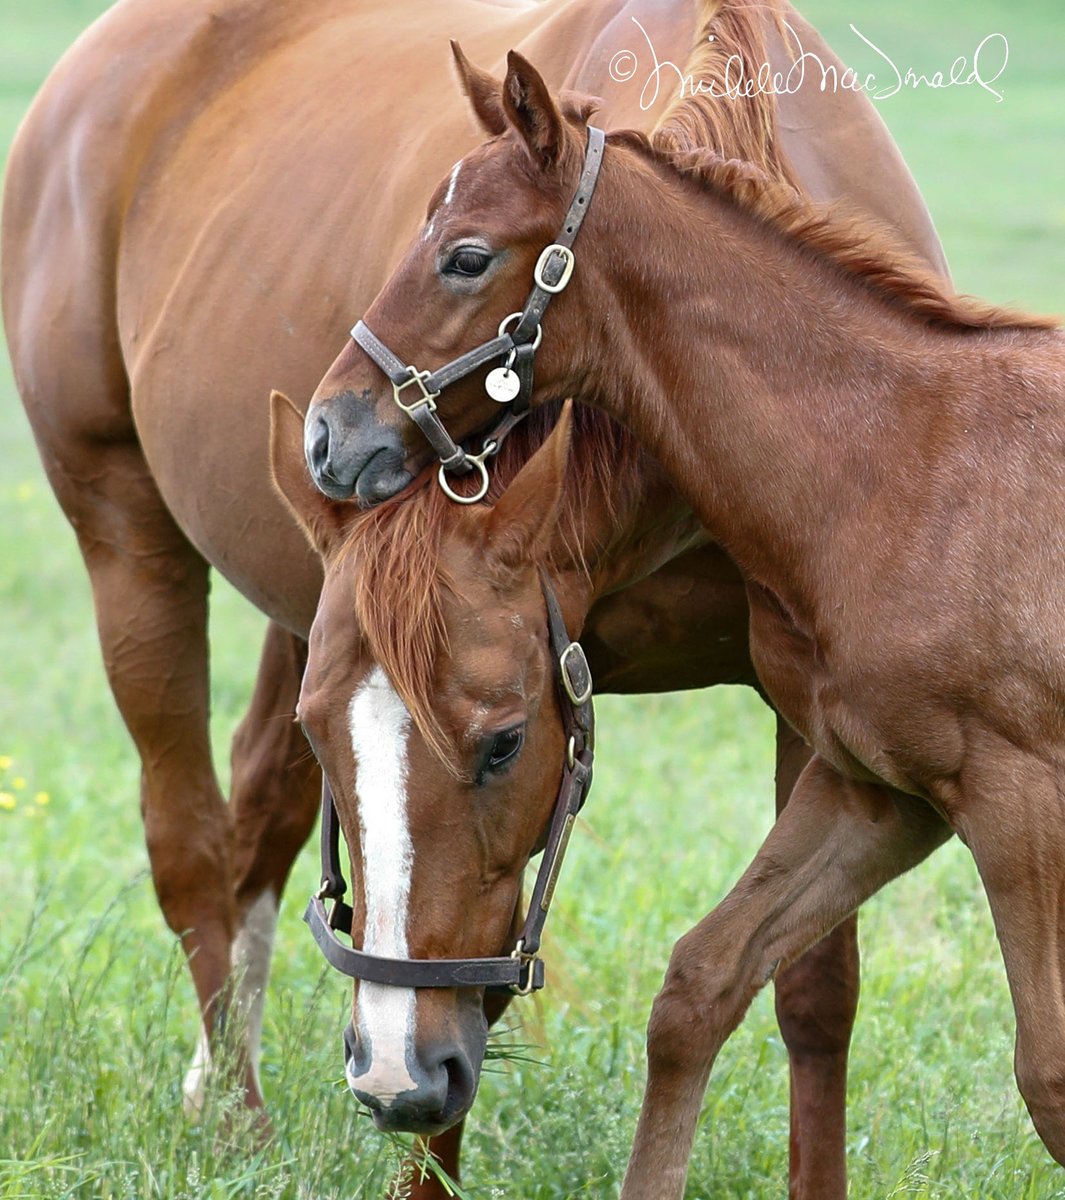 On a holiday #MareMonday, a salute to patient mothers! Littleprincessemma, dam of Triple Crown winner American Pharoah, is so kindly indulgent with her sassy 1 1/2-month old daughter by #Tapit, an Easter baby named Sunrise Service